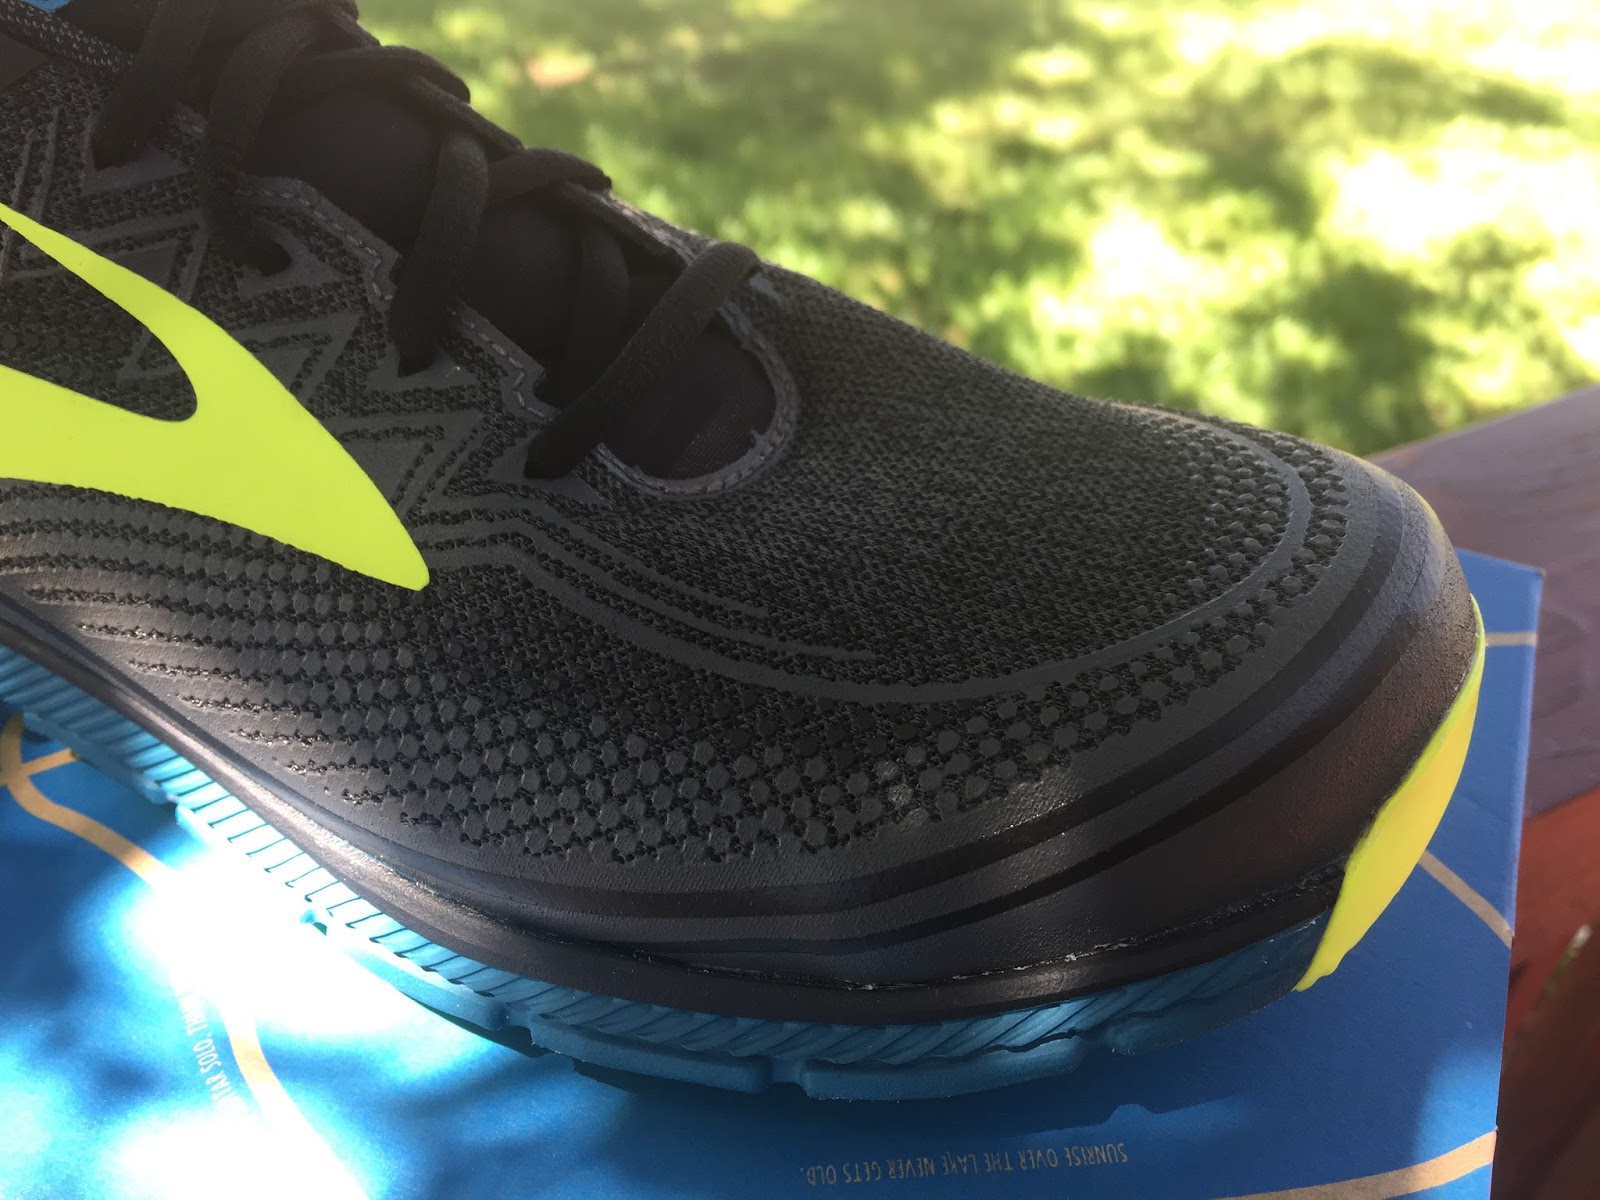 Road Trail Run: Brooks PureGrit 6 Review - Protective, Natural Running,  Everyday Trainer for Varied Terrain